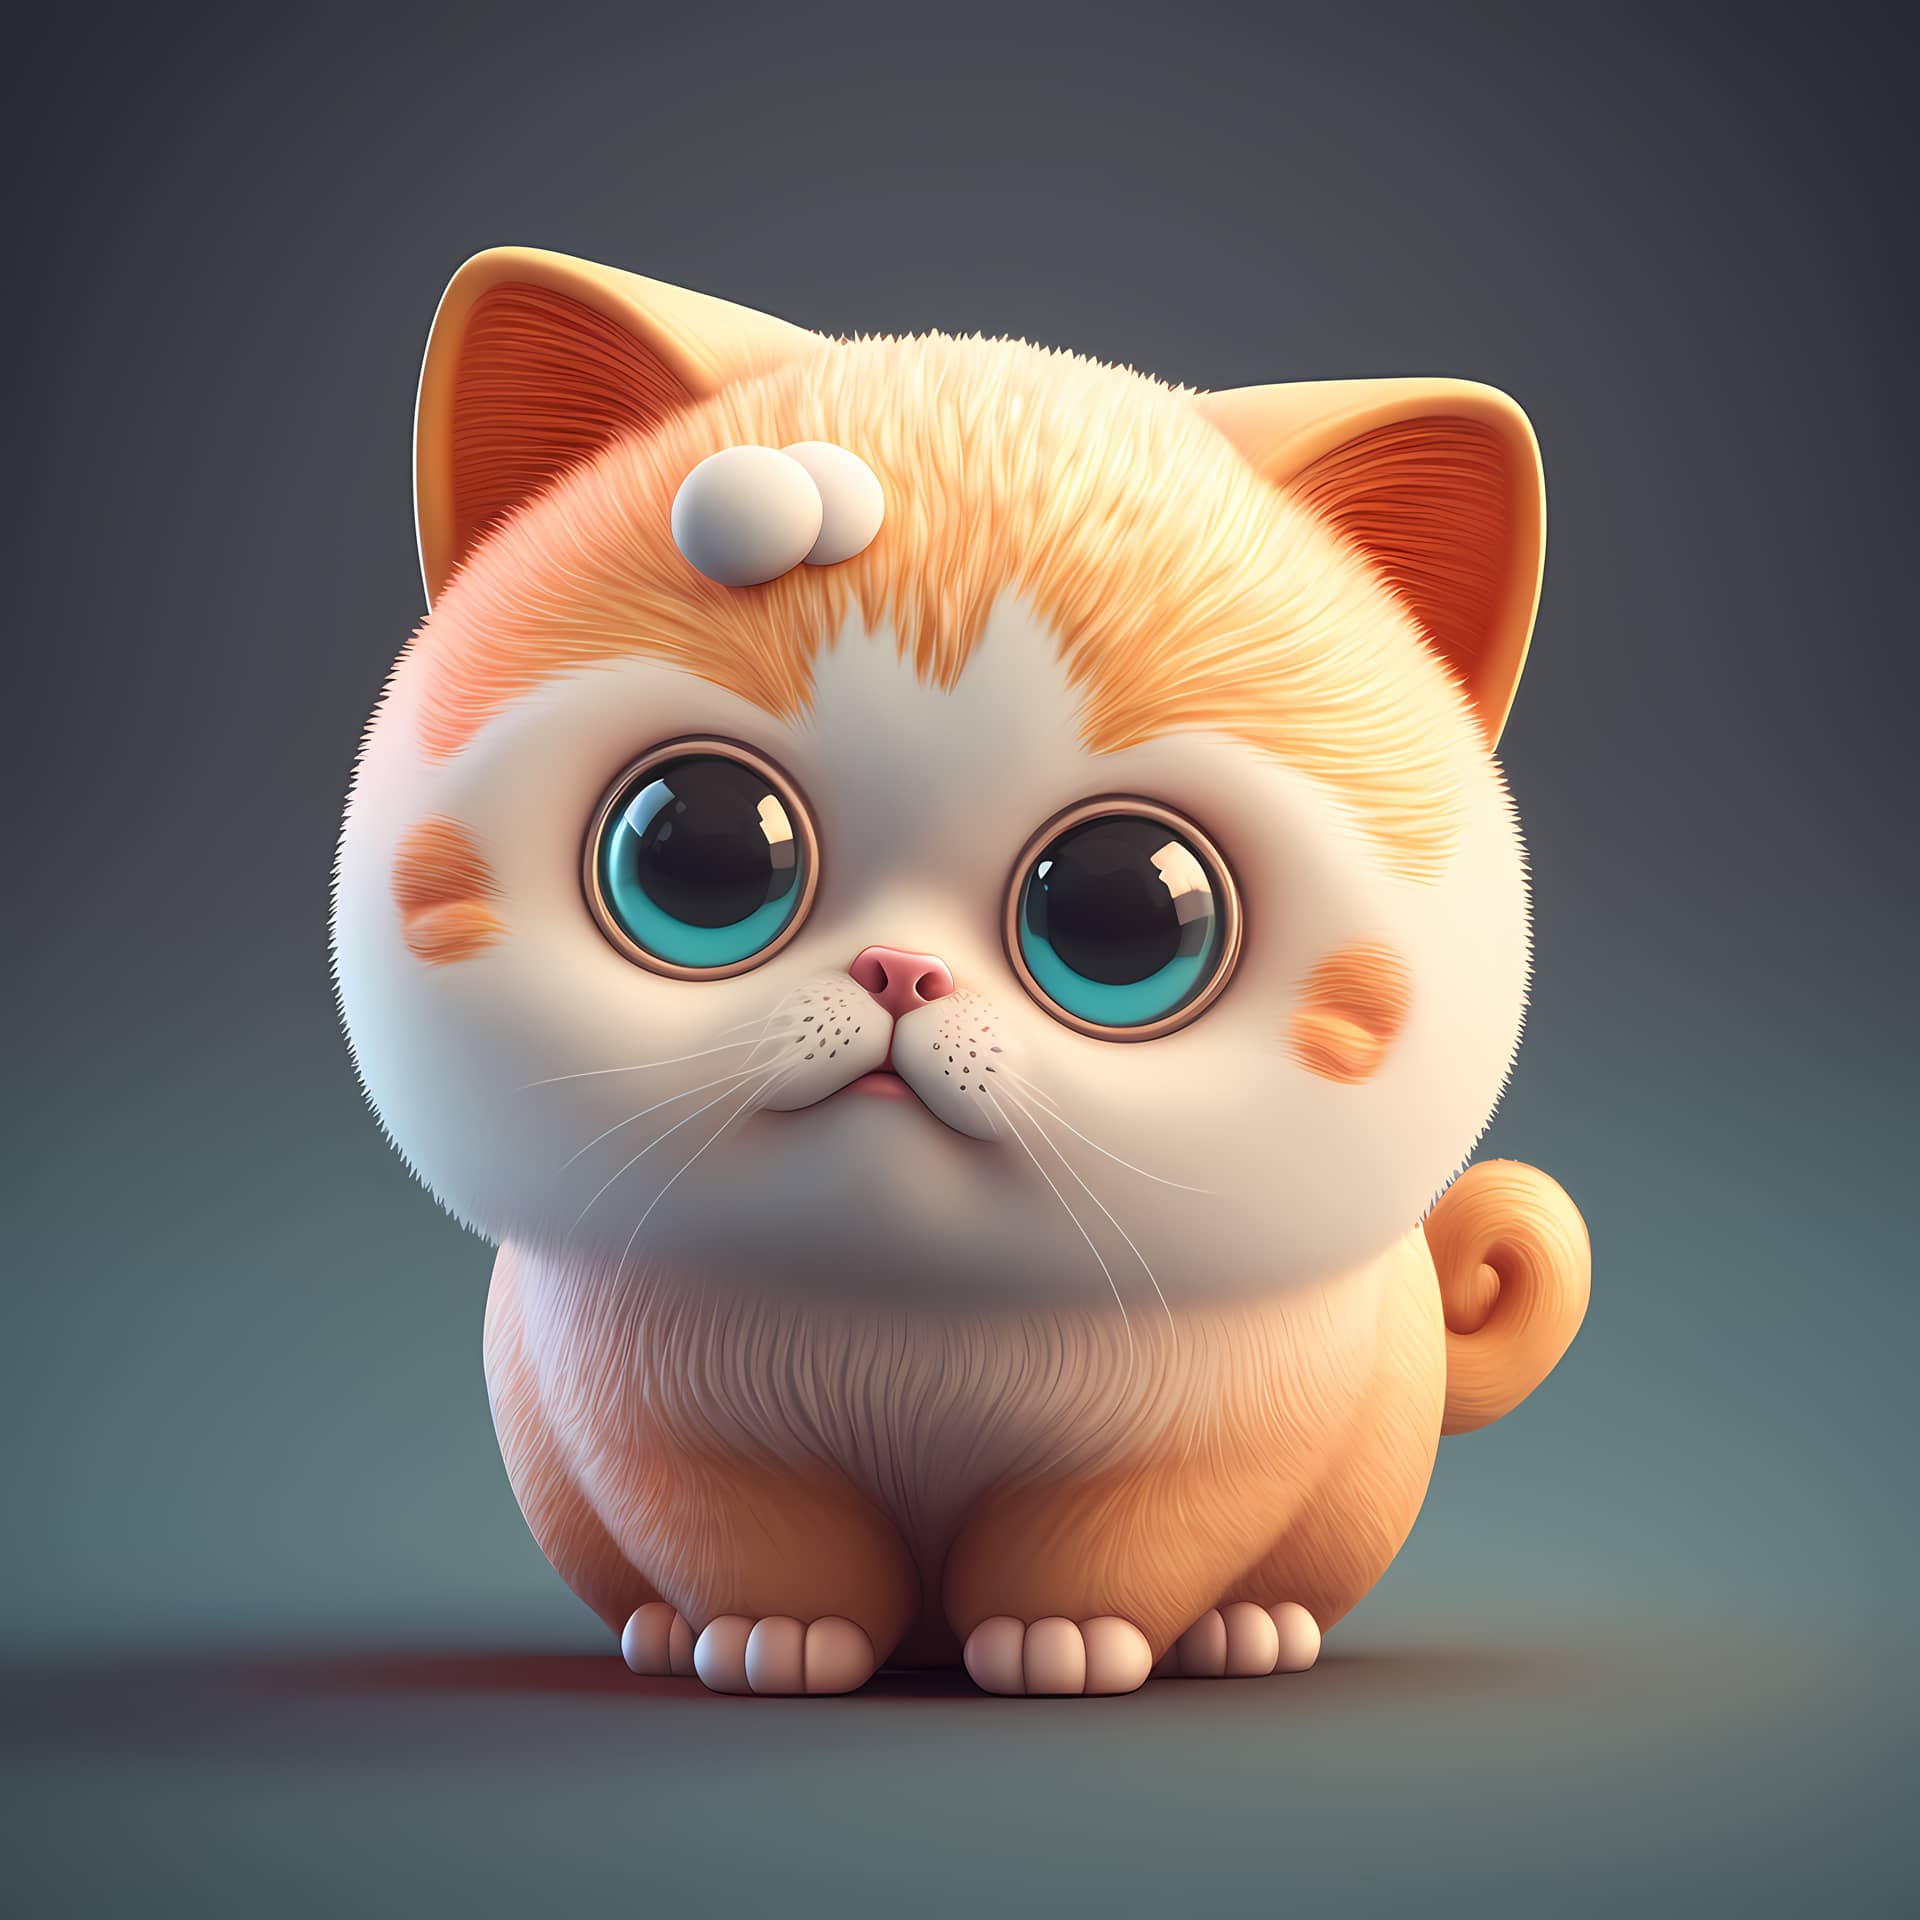 Cute profile photos adorable cute chubby cat 3d render picture